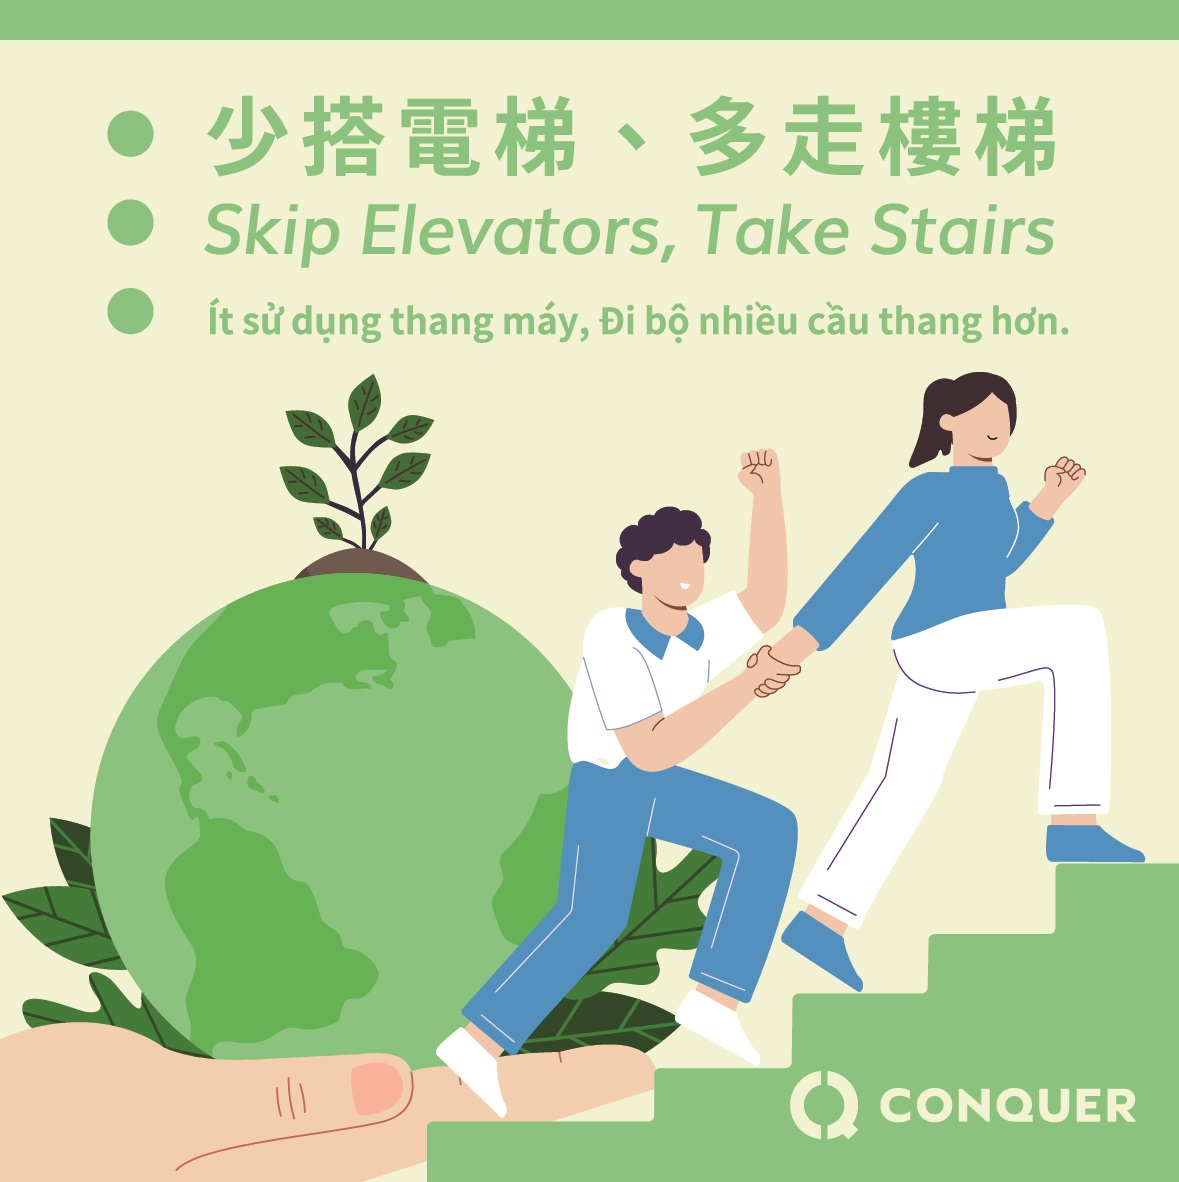 Today, on Earth Day, CONQUER Electronics is dedicated to energy-saving and carbon reduction efforts for a greener future. 
Let's take the stairs more and the elevator less, making a difference for our planet.
#EarthDay #CarbonReduction #CONQUER #FuseMaker